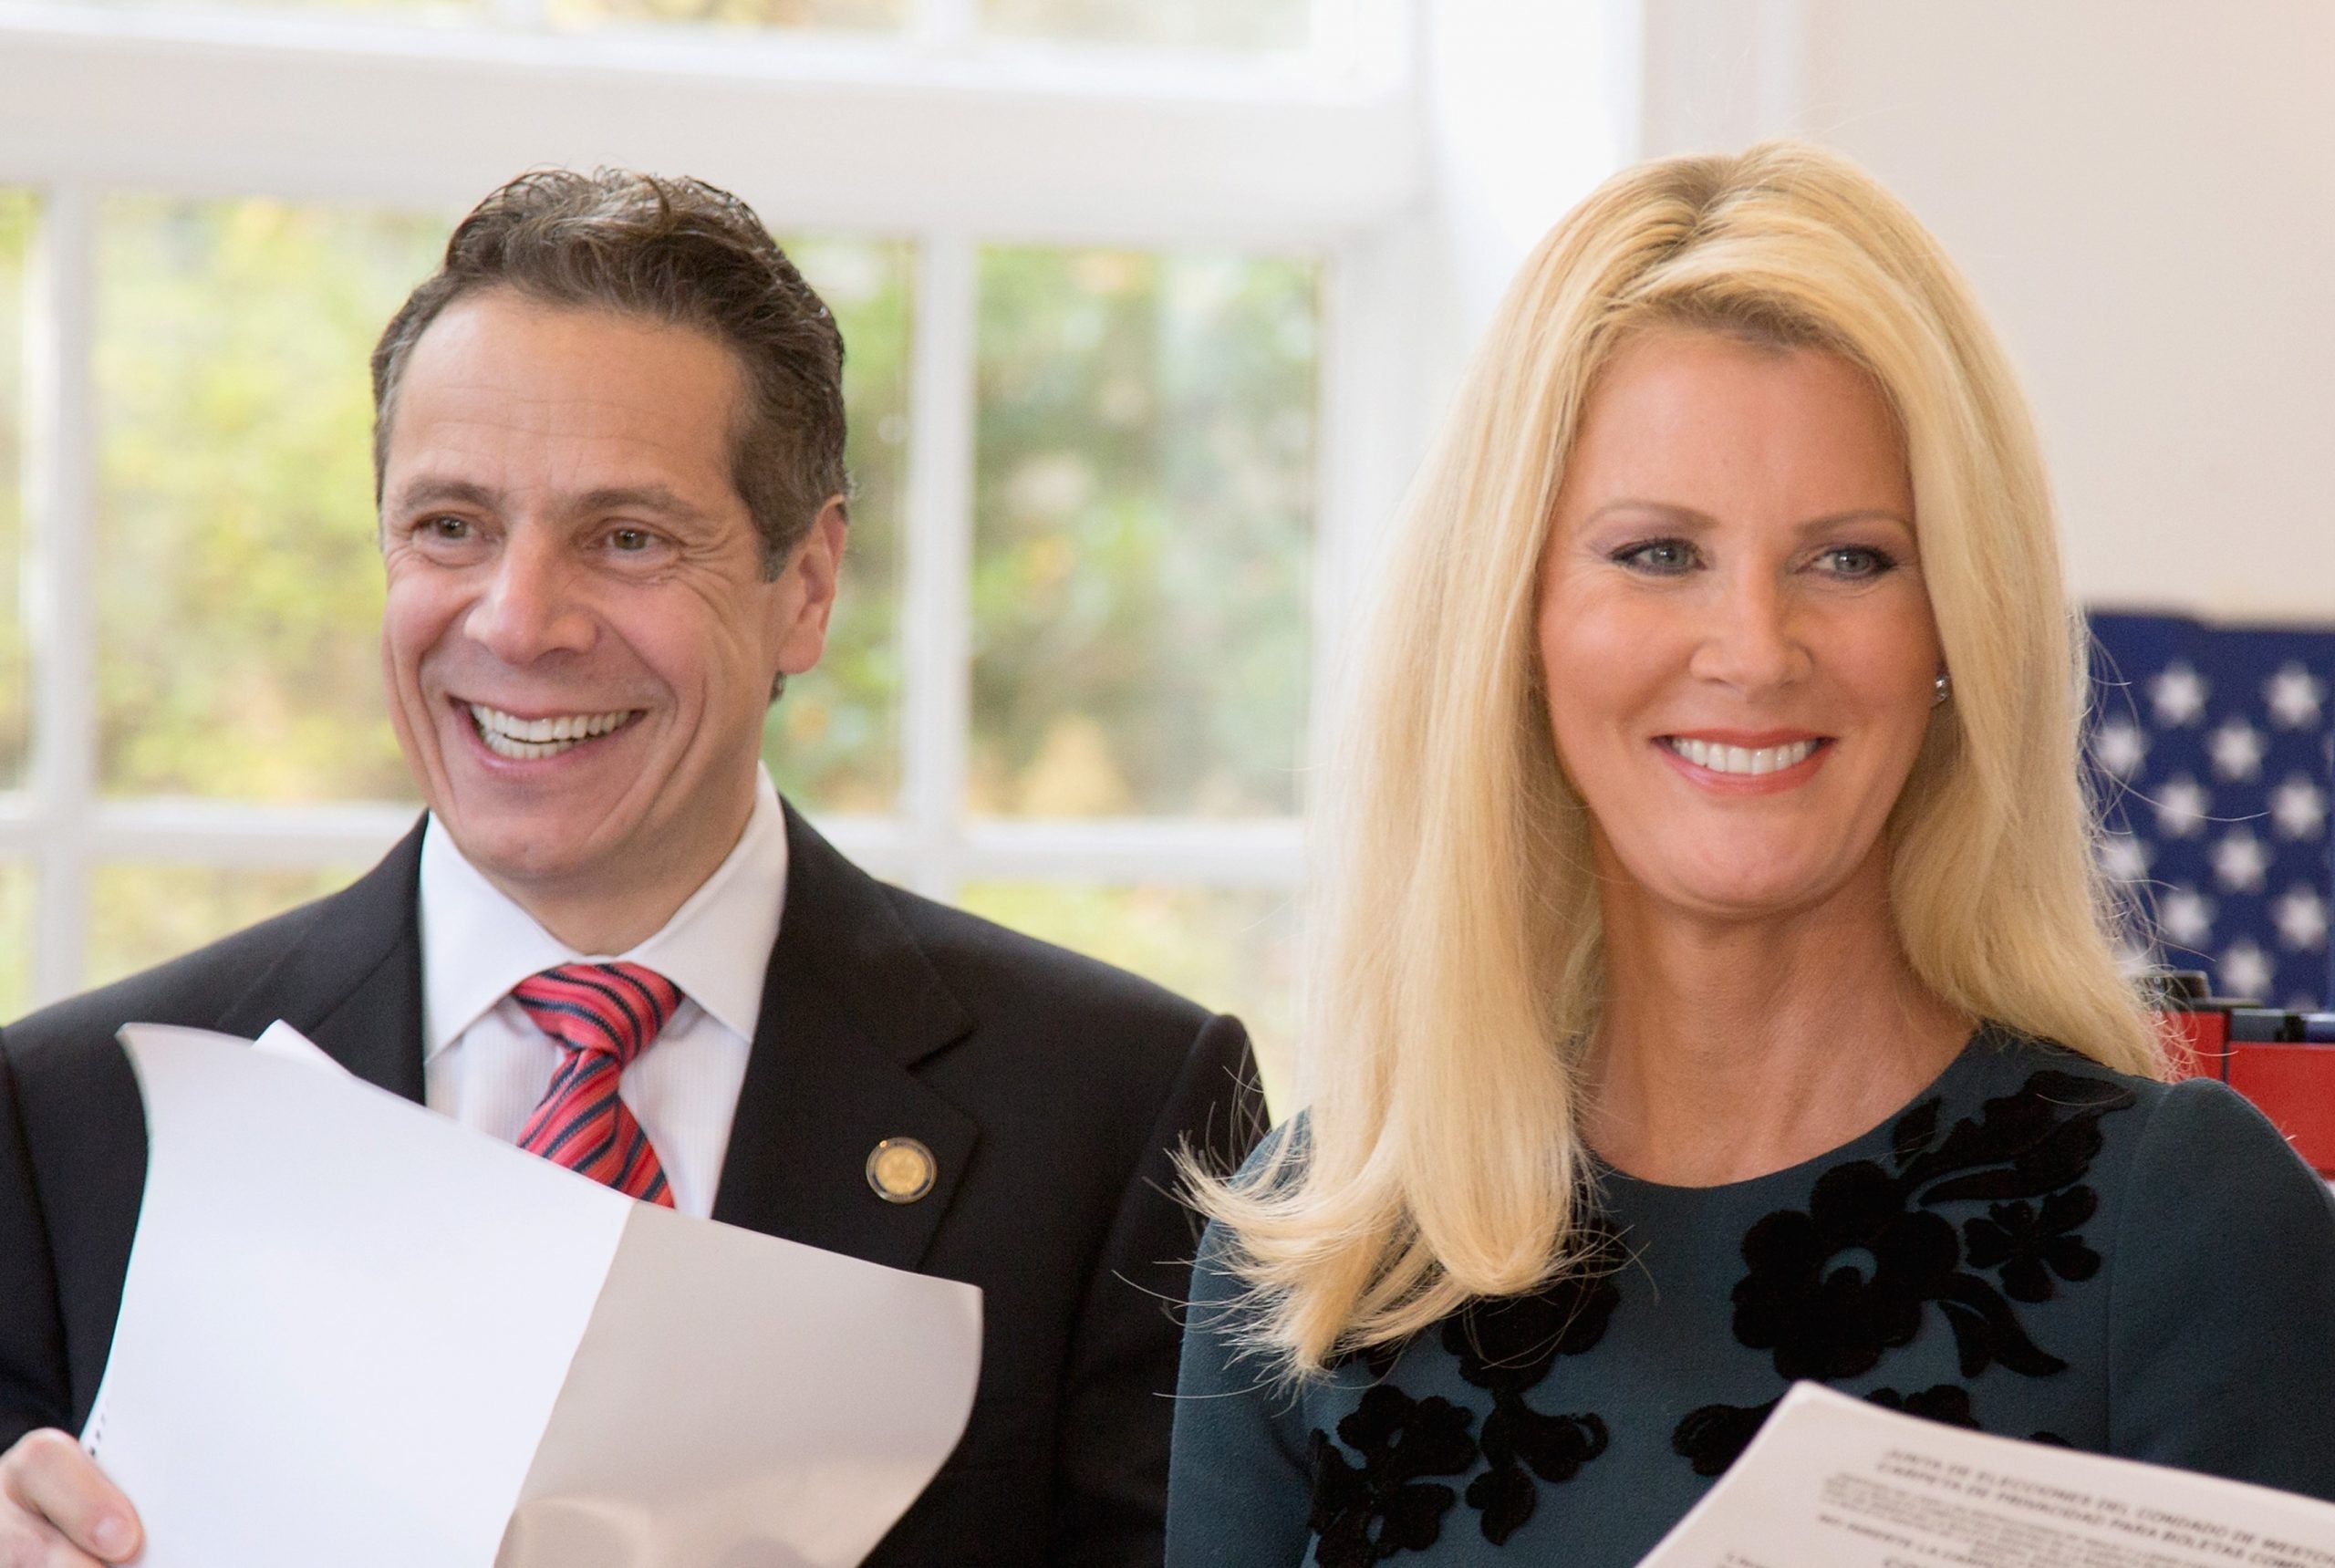 Does Sandra Lee Have Children With Governor Andrew Cuomo?